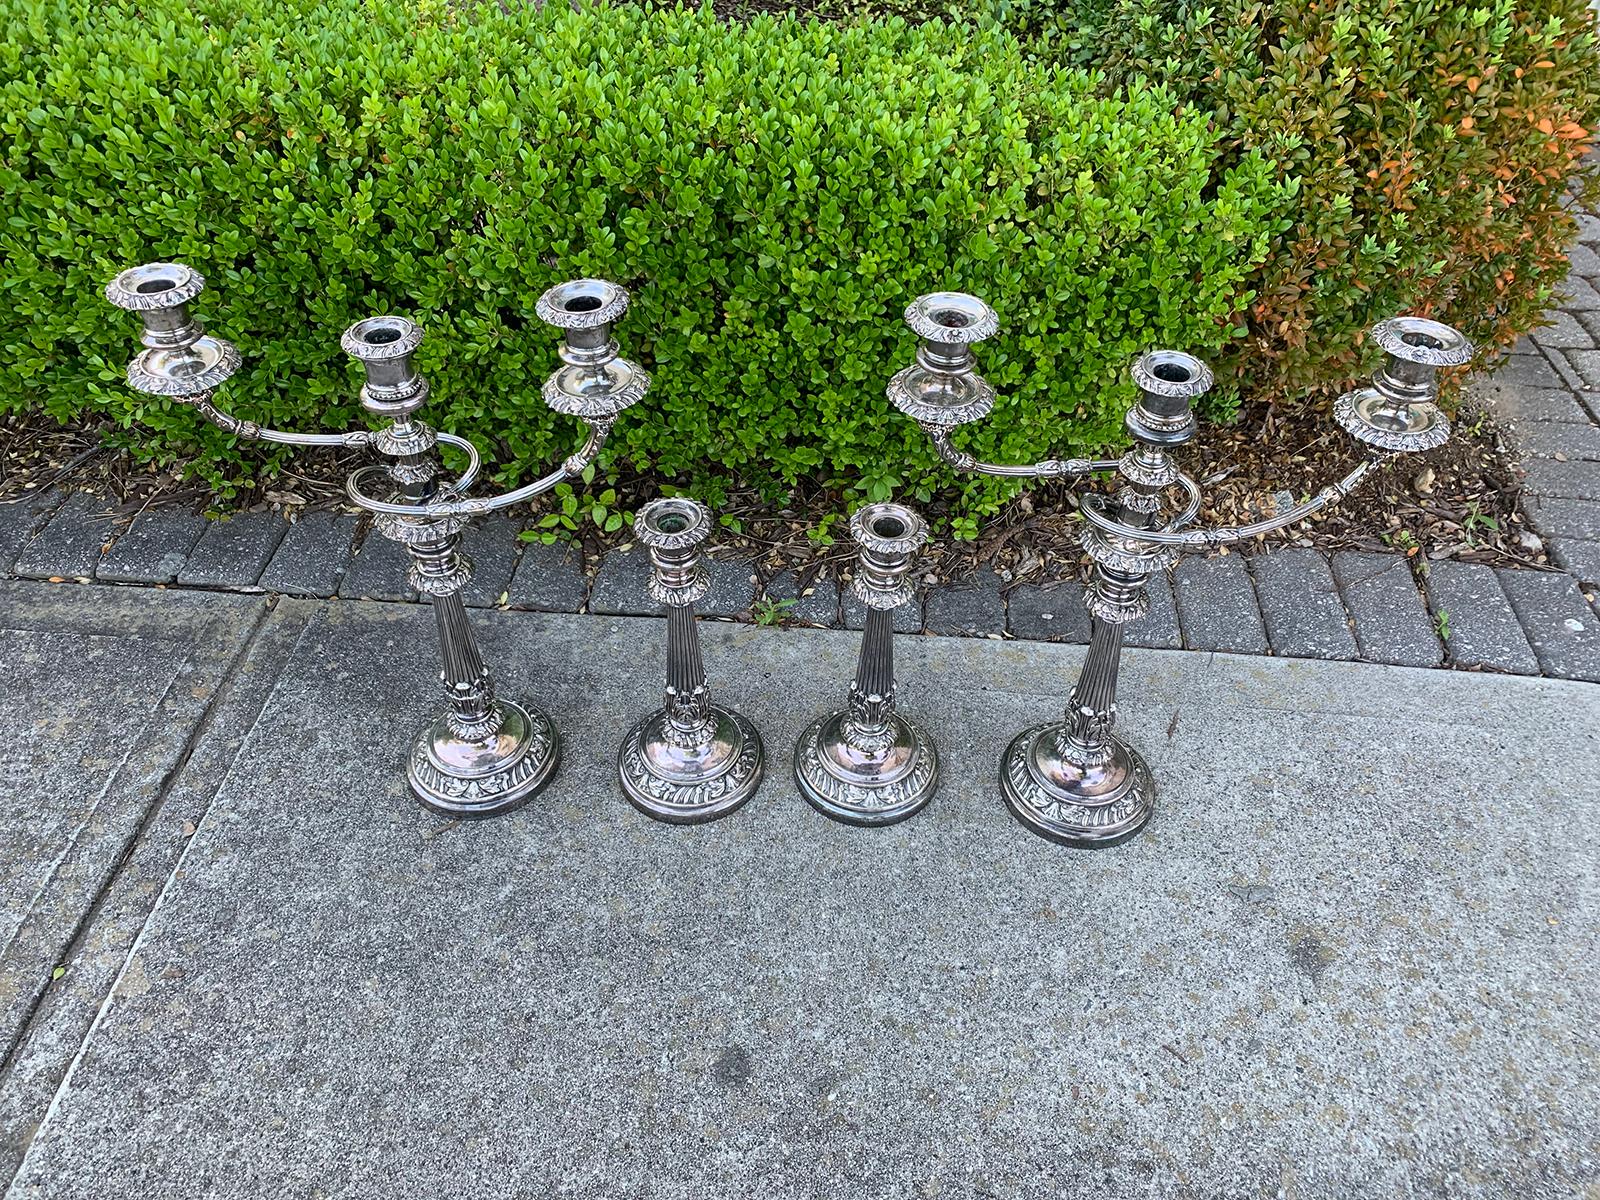 Set of Four Matthew Boulton Sheffield Plate Candlesticks and Candelabras, Marked 5